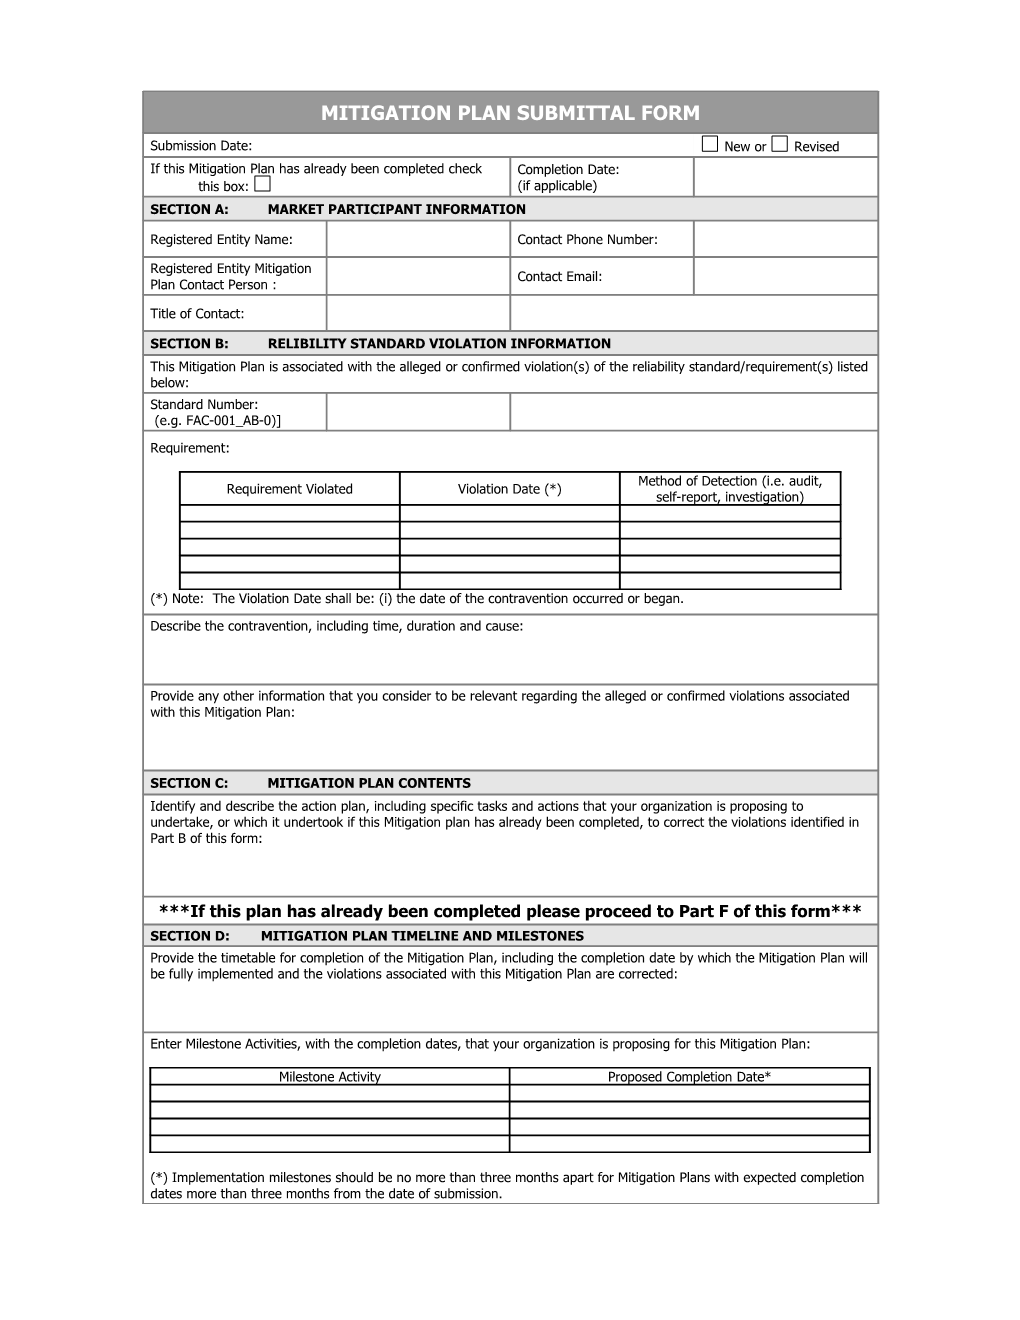 Self-Reporting Form